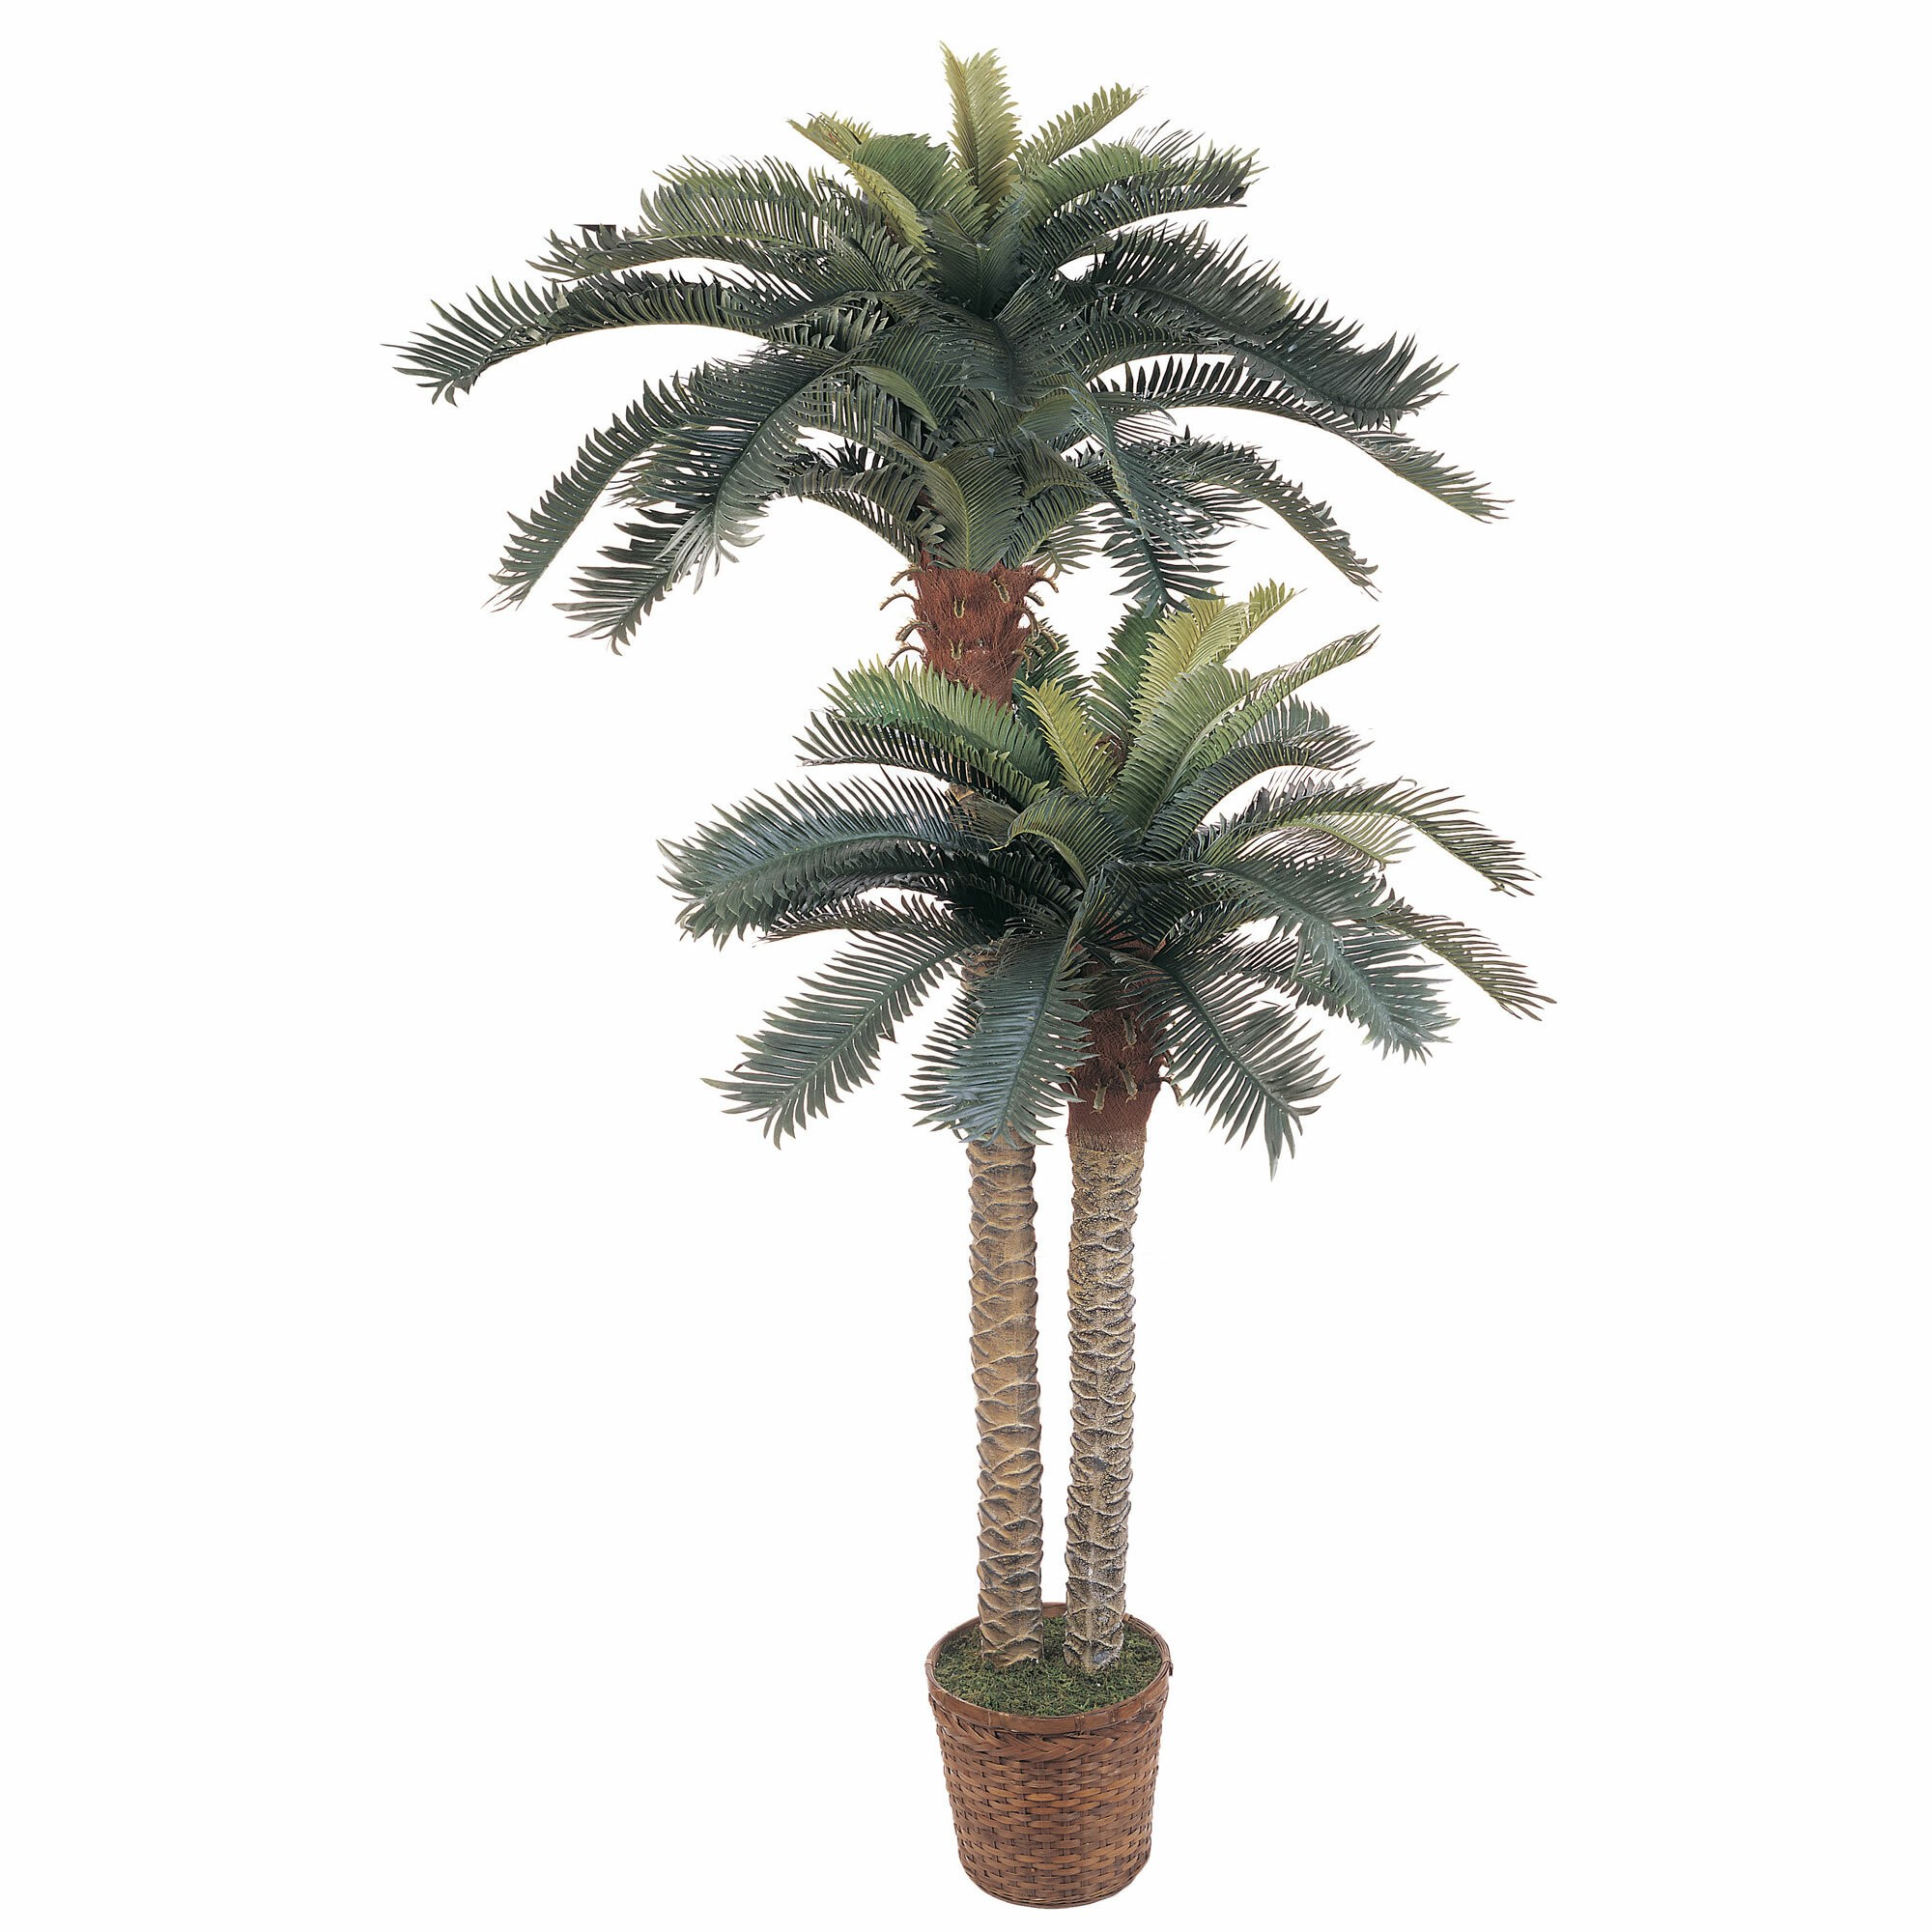 Sago Palm Double Potted Tree in Basket